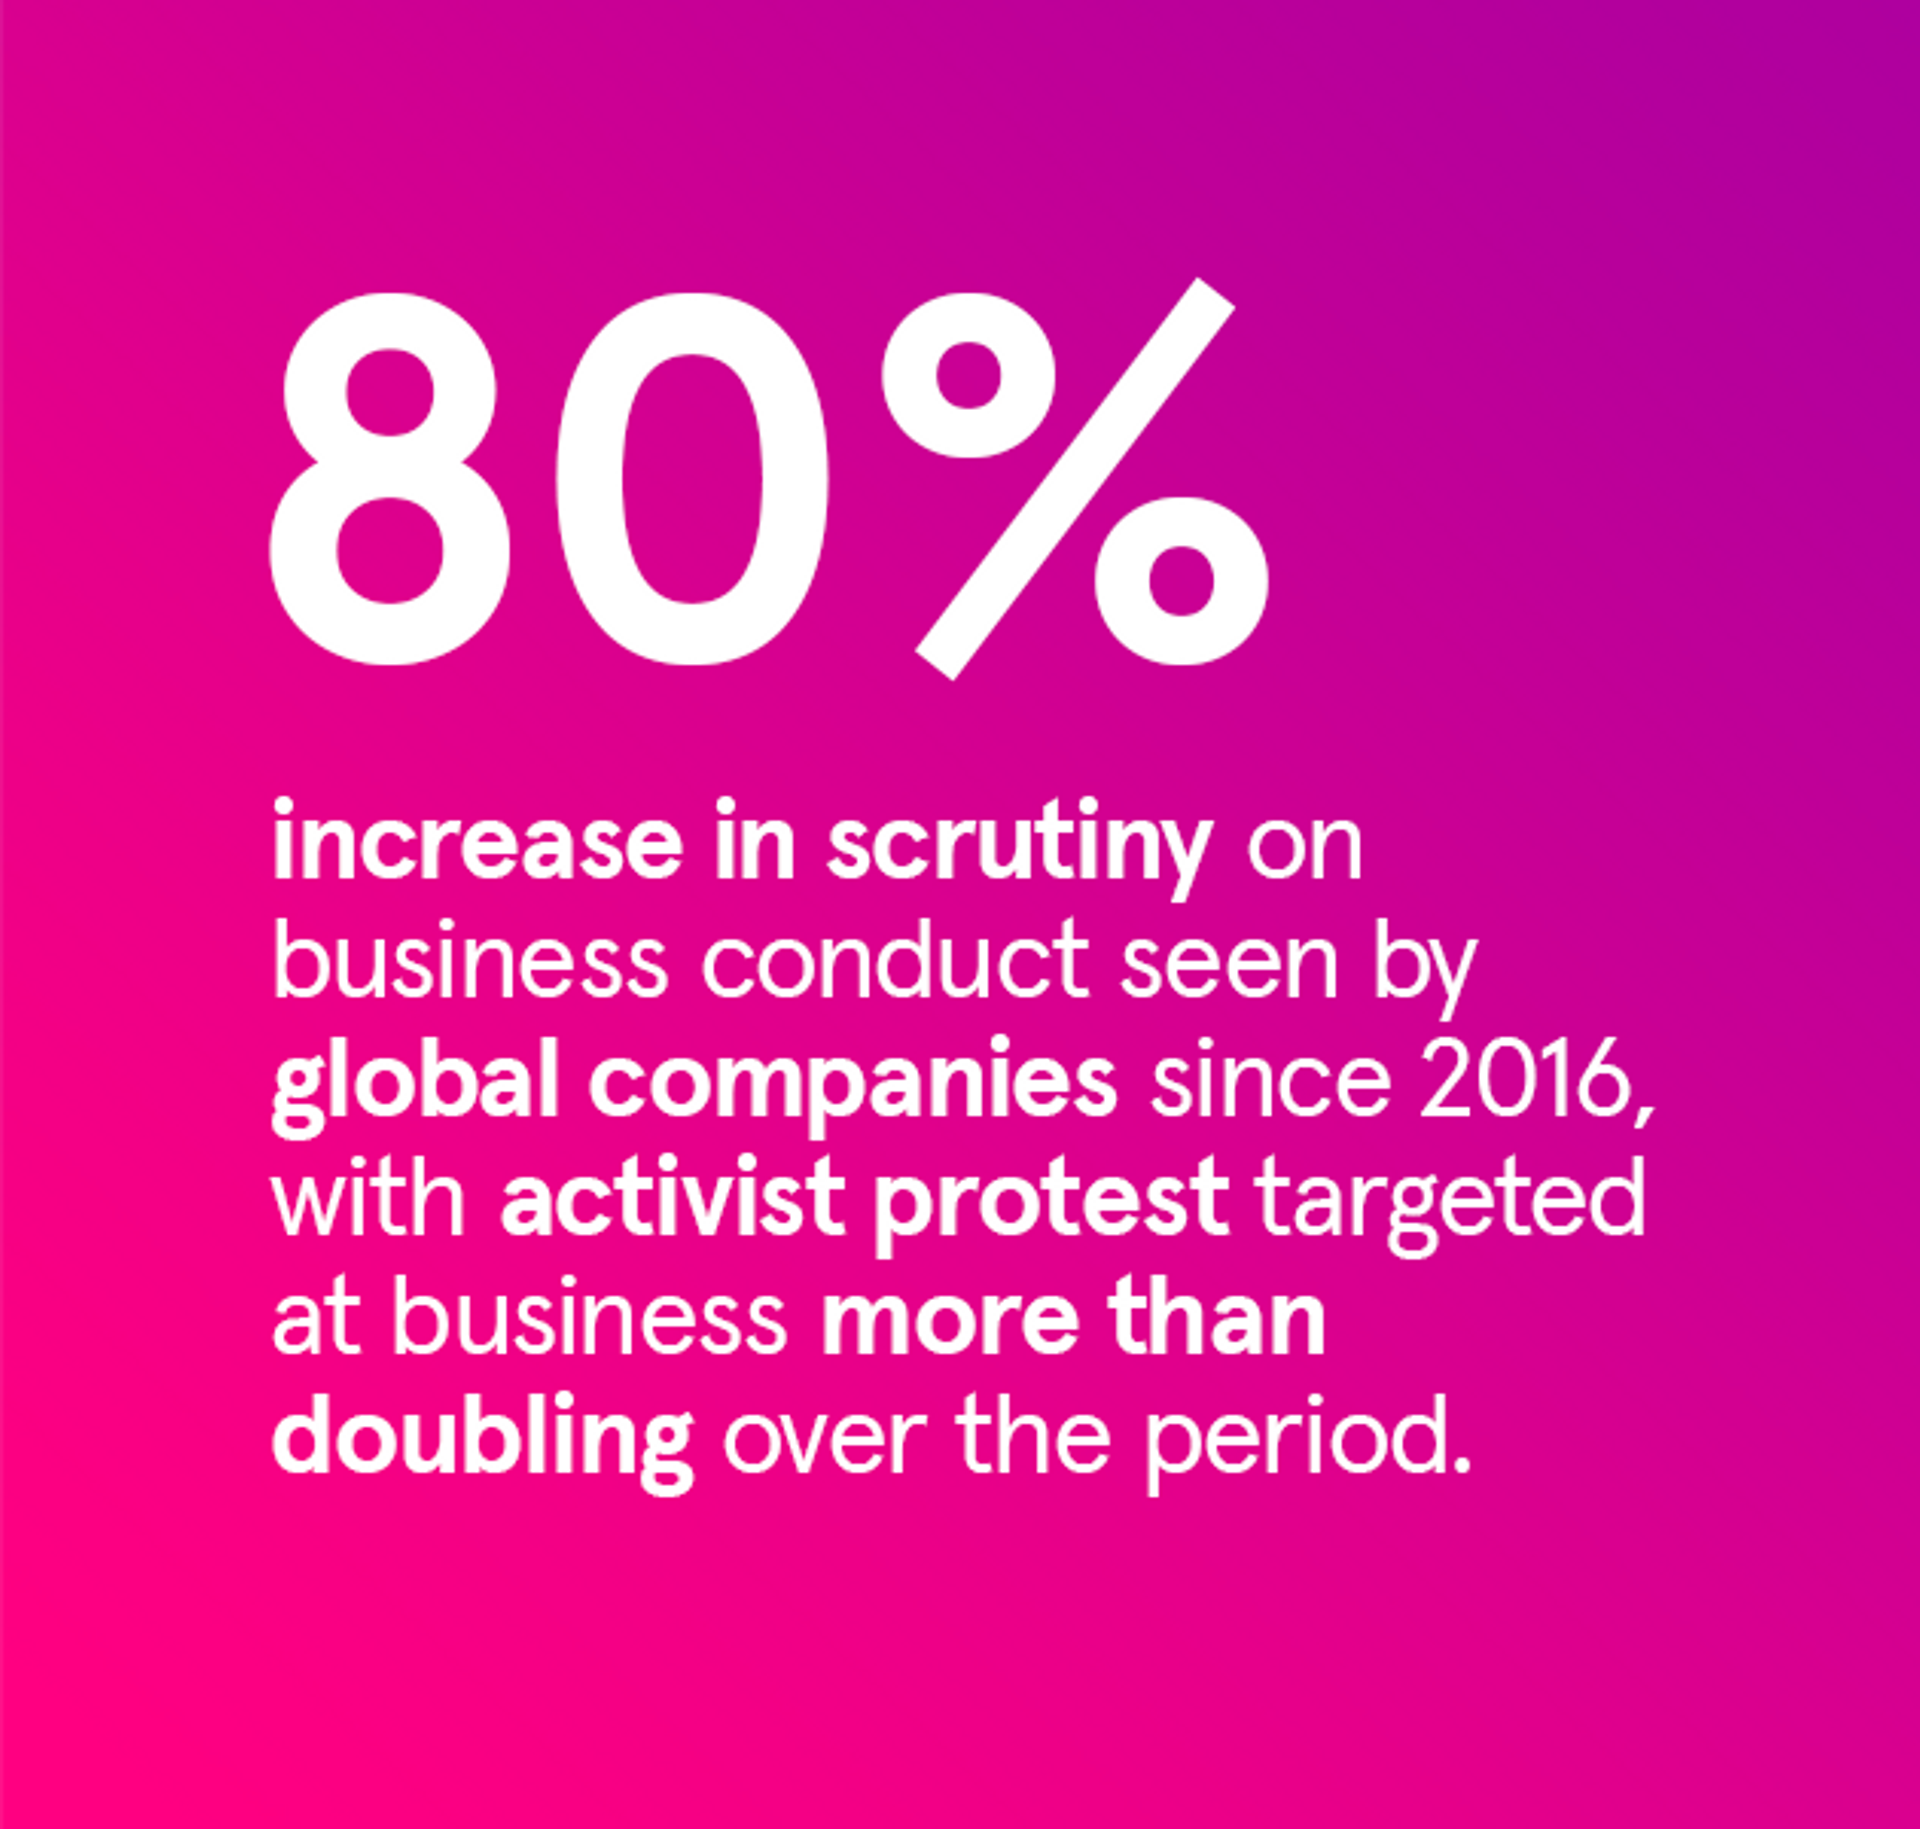 Infographic stating: 80% increase in scrutiny on business conduct seen by global companies since 2016, with activist protest targeted at business more than doubling over the period